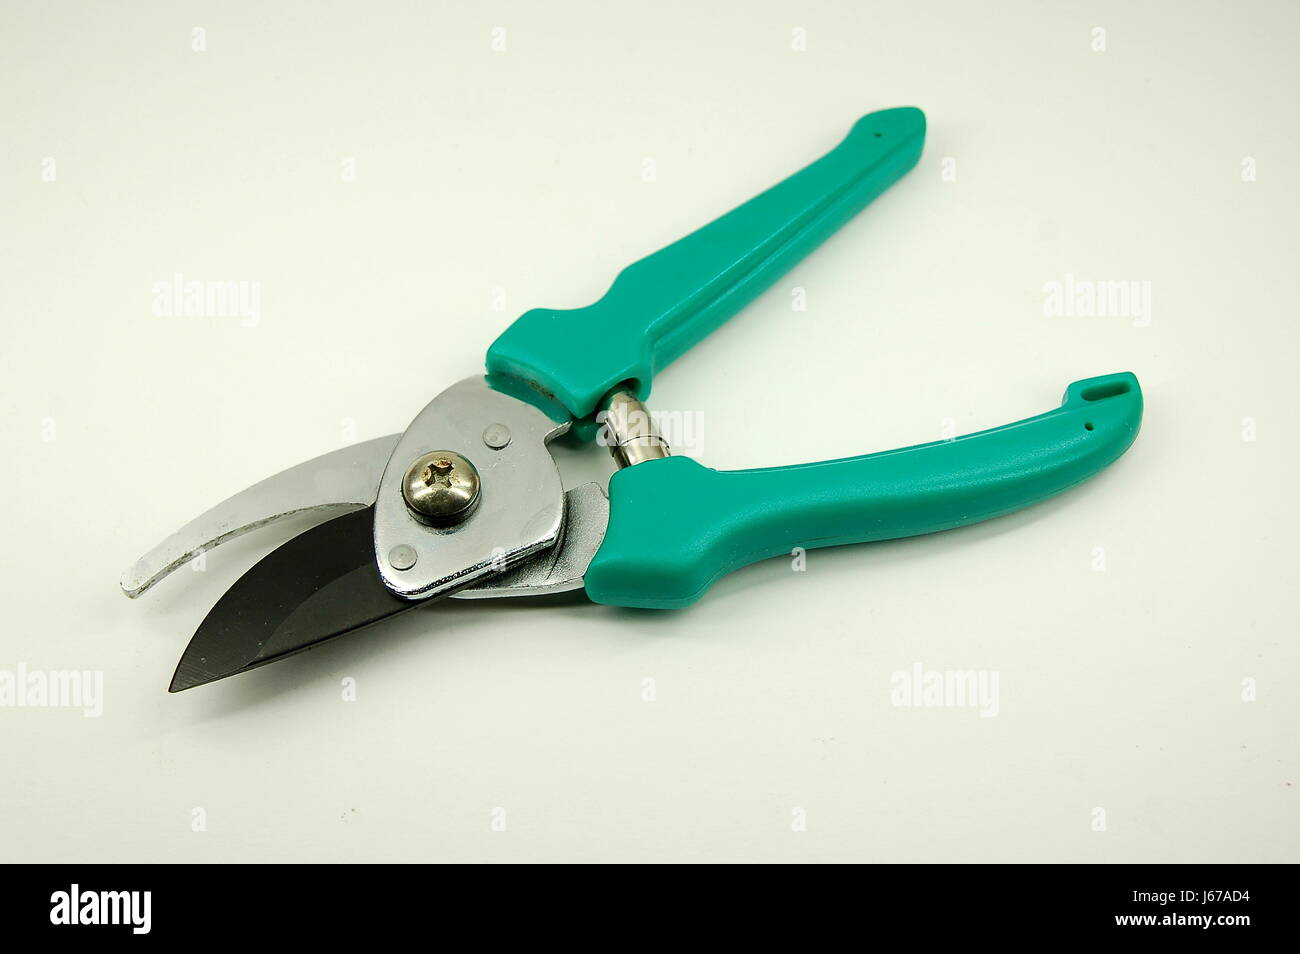 tools metal plastic synthetic material blade circumcise hedge shears secateurs Stock Photo